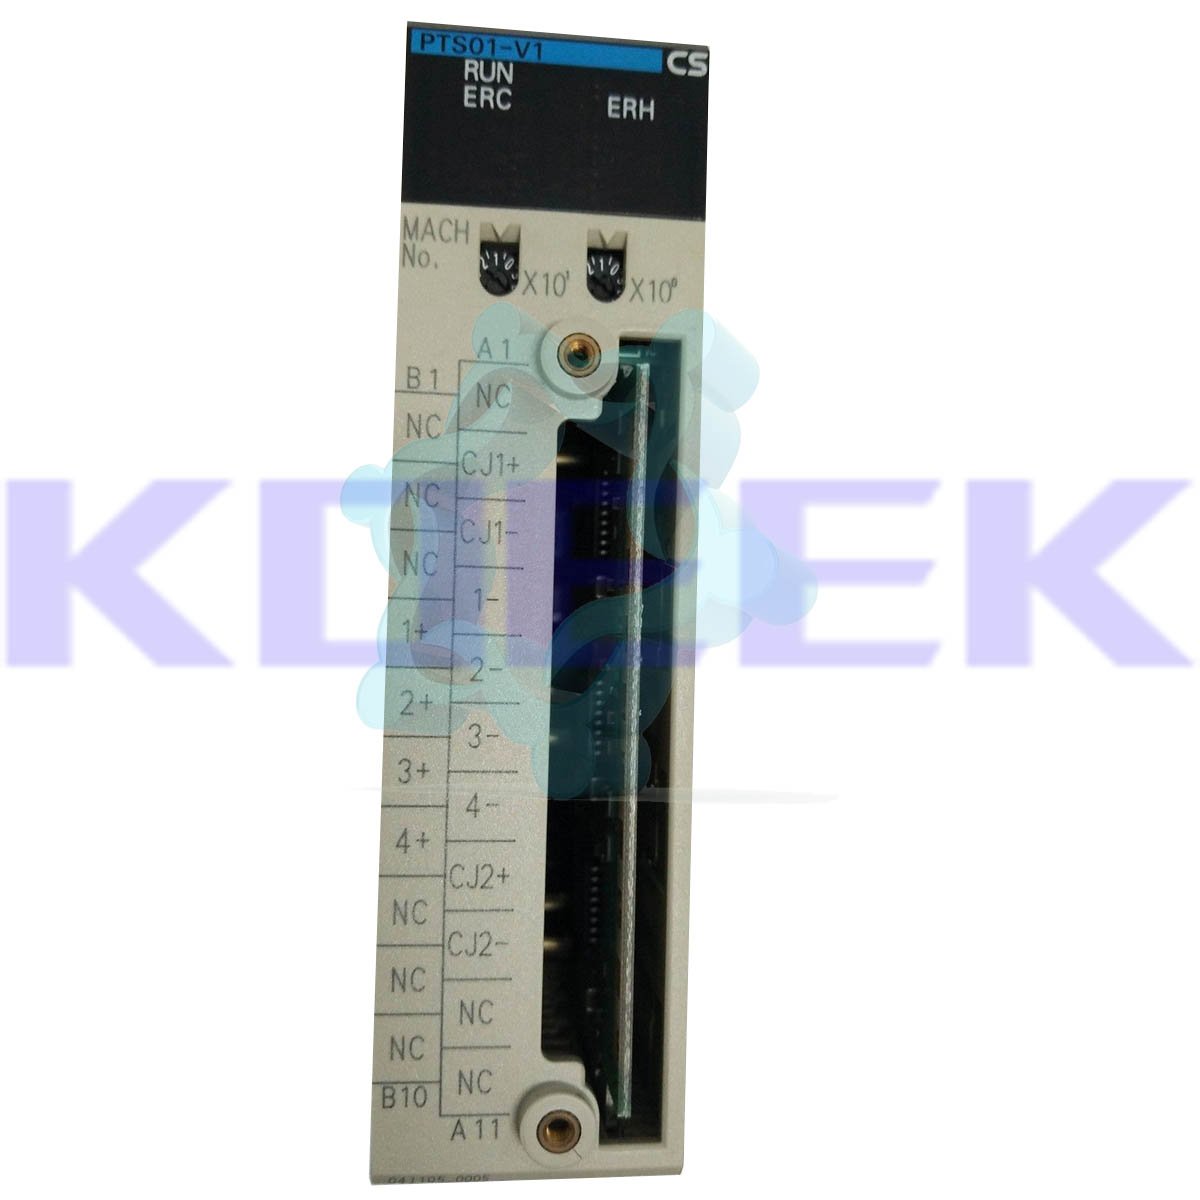 CS1W-PTS01-V1 KOEED 500+, 80%, import_2020_10_10_031751, Omron, Other